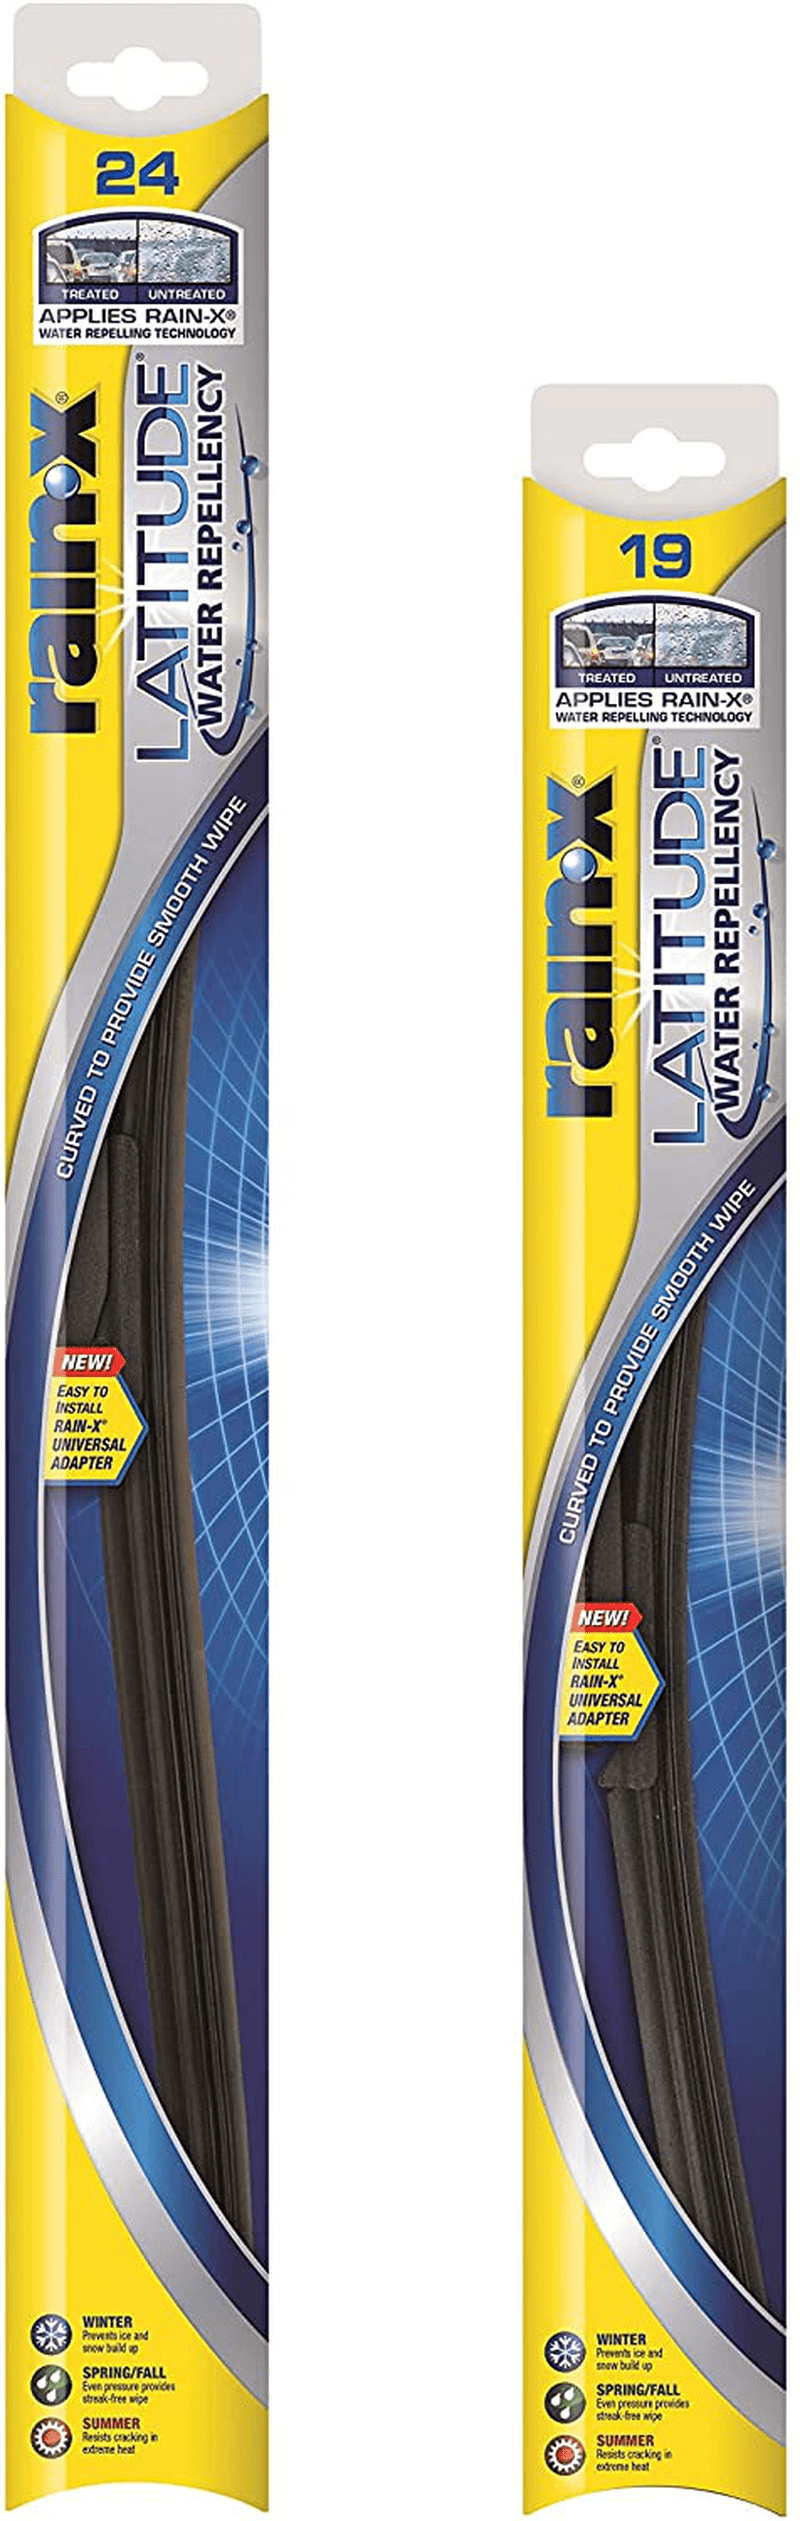 Rain-X - 810163 Latitude Water Repellency Wiper Blade Combo Pack 26" and 16" Vehicles & Parts > Vehicle Parts & Accessories > Motor Vehicle Parts Rain-X 2-pack 24 / 19 in combo 